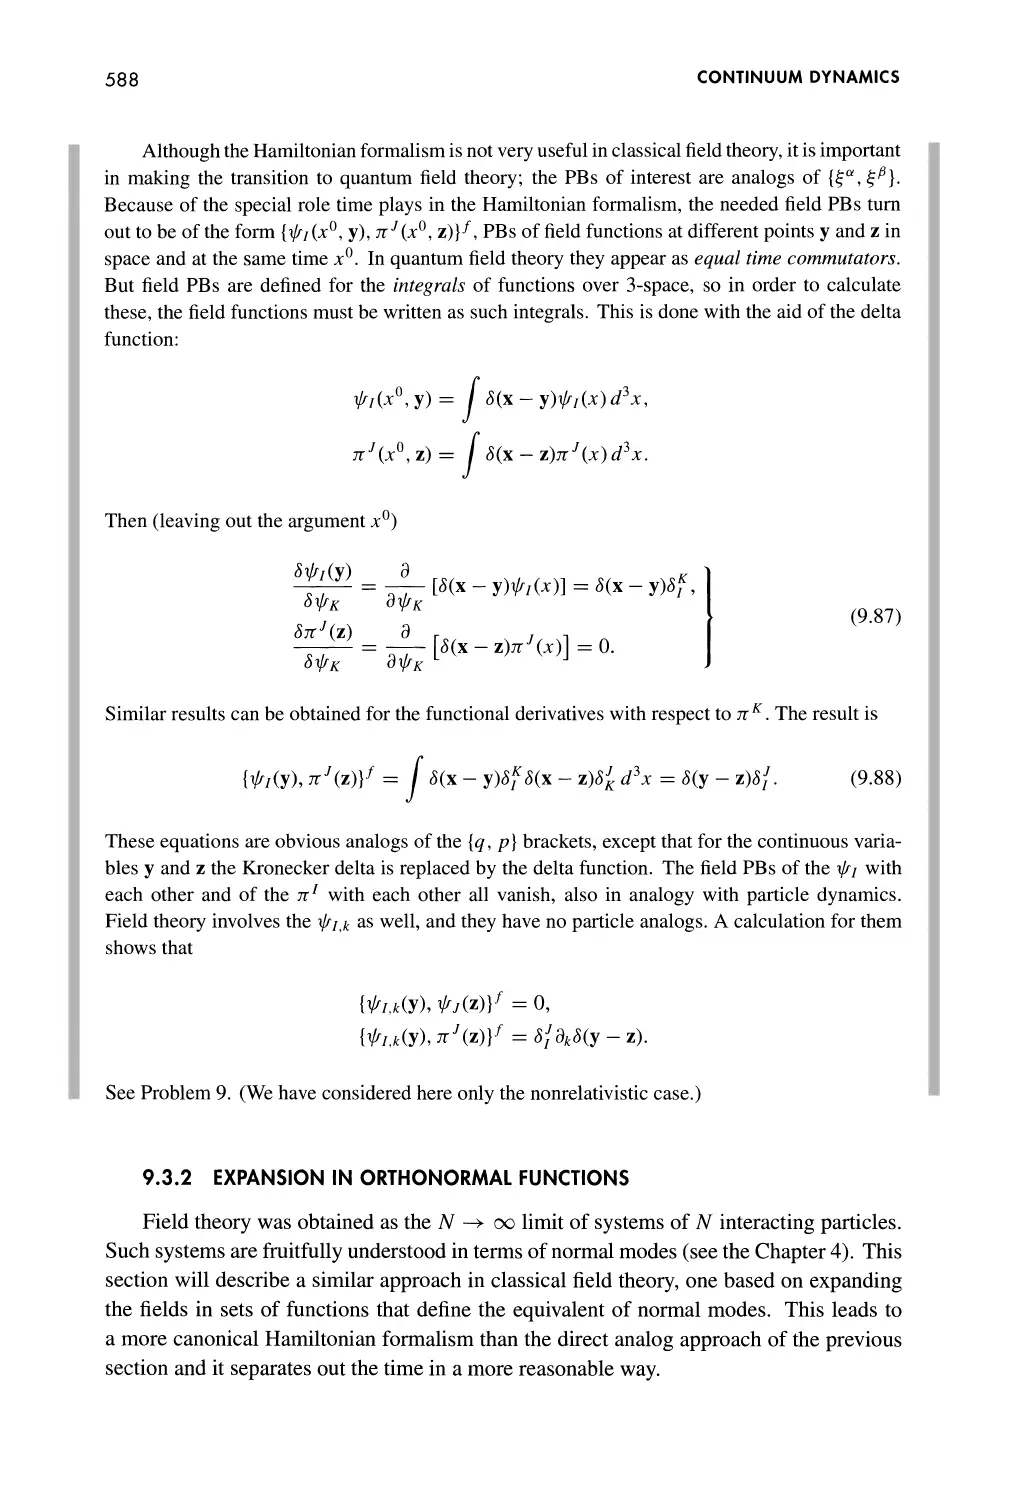 9.3.2 Expansion in Orthonormal Functions